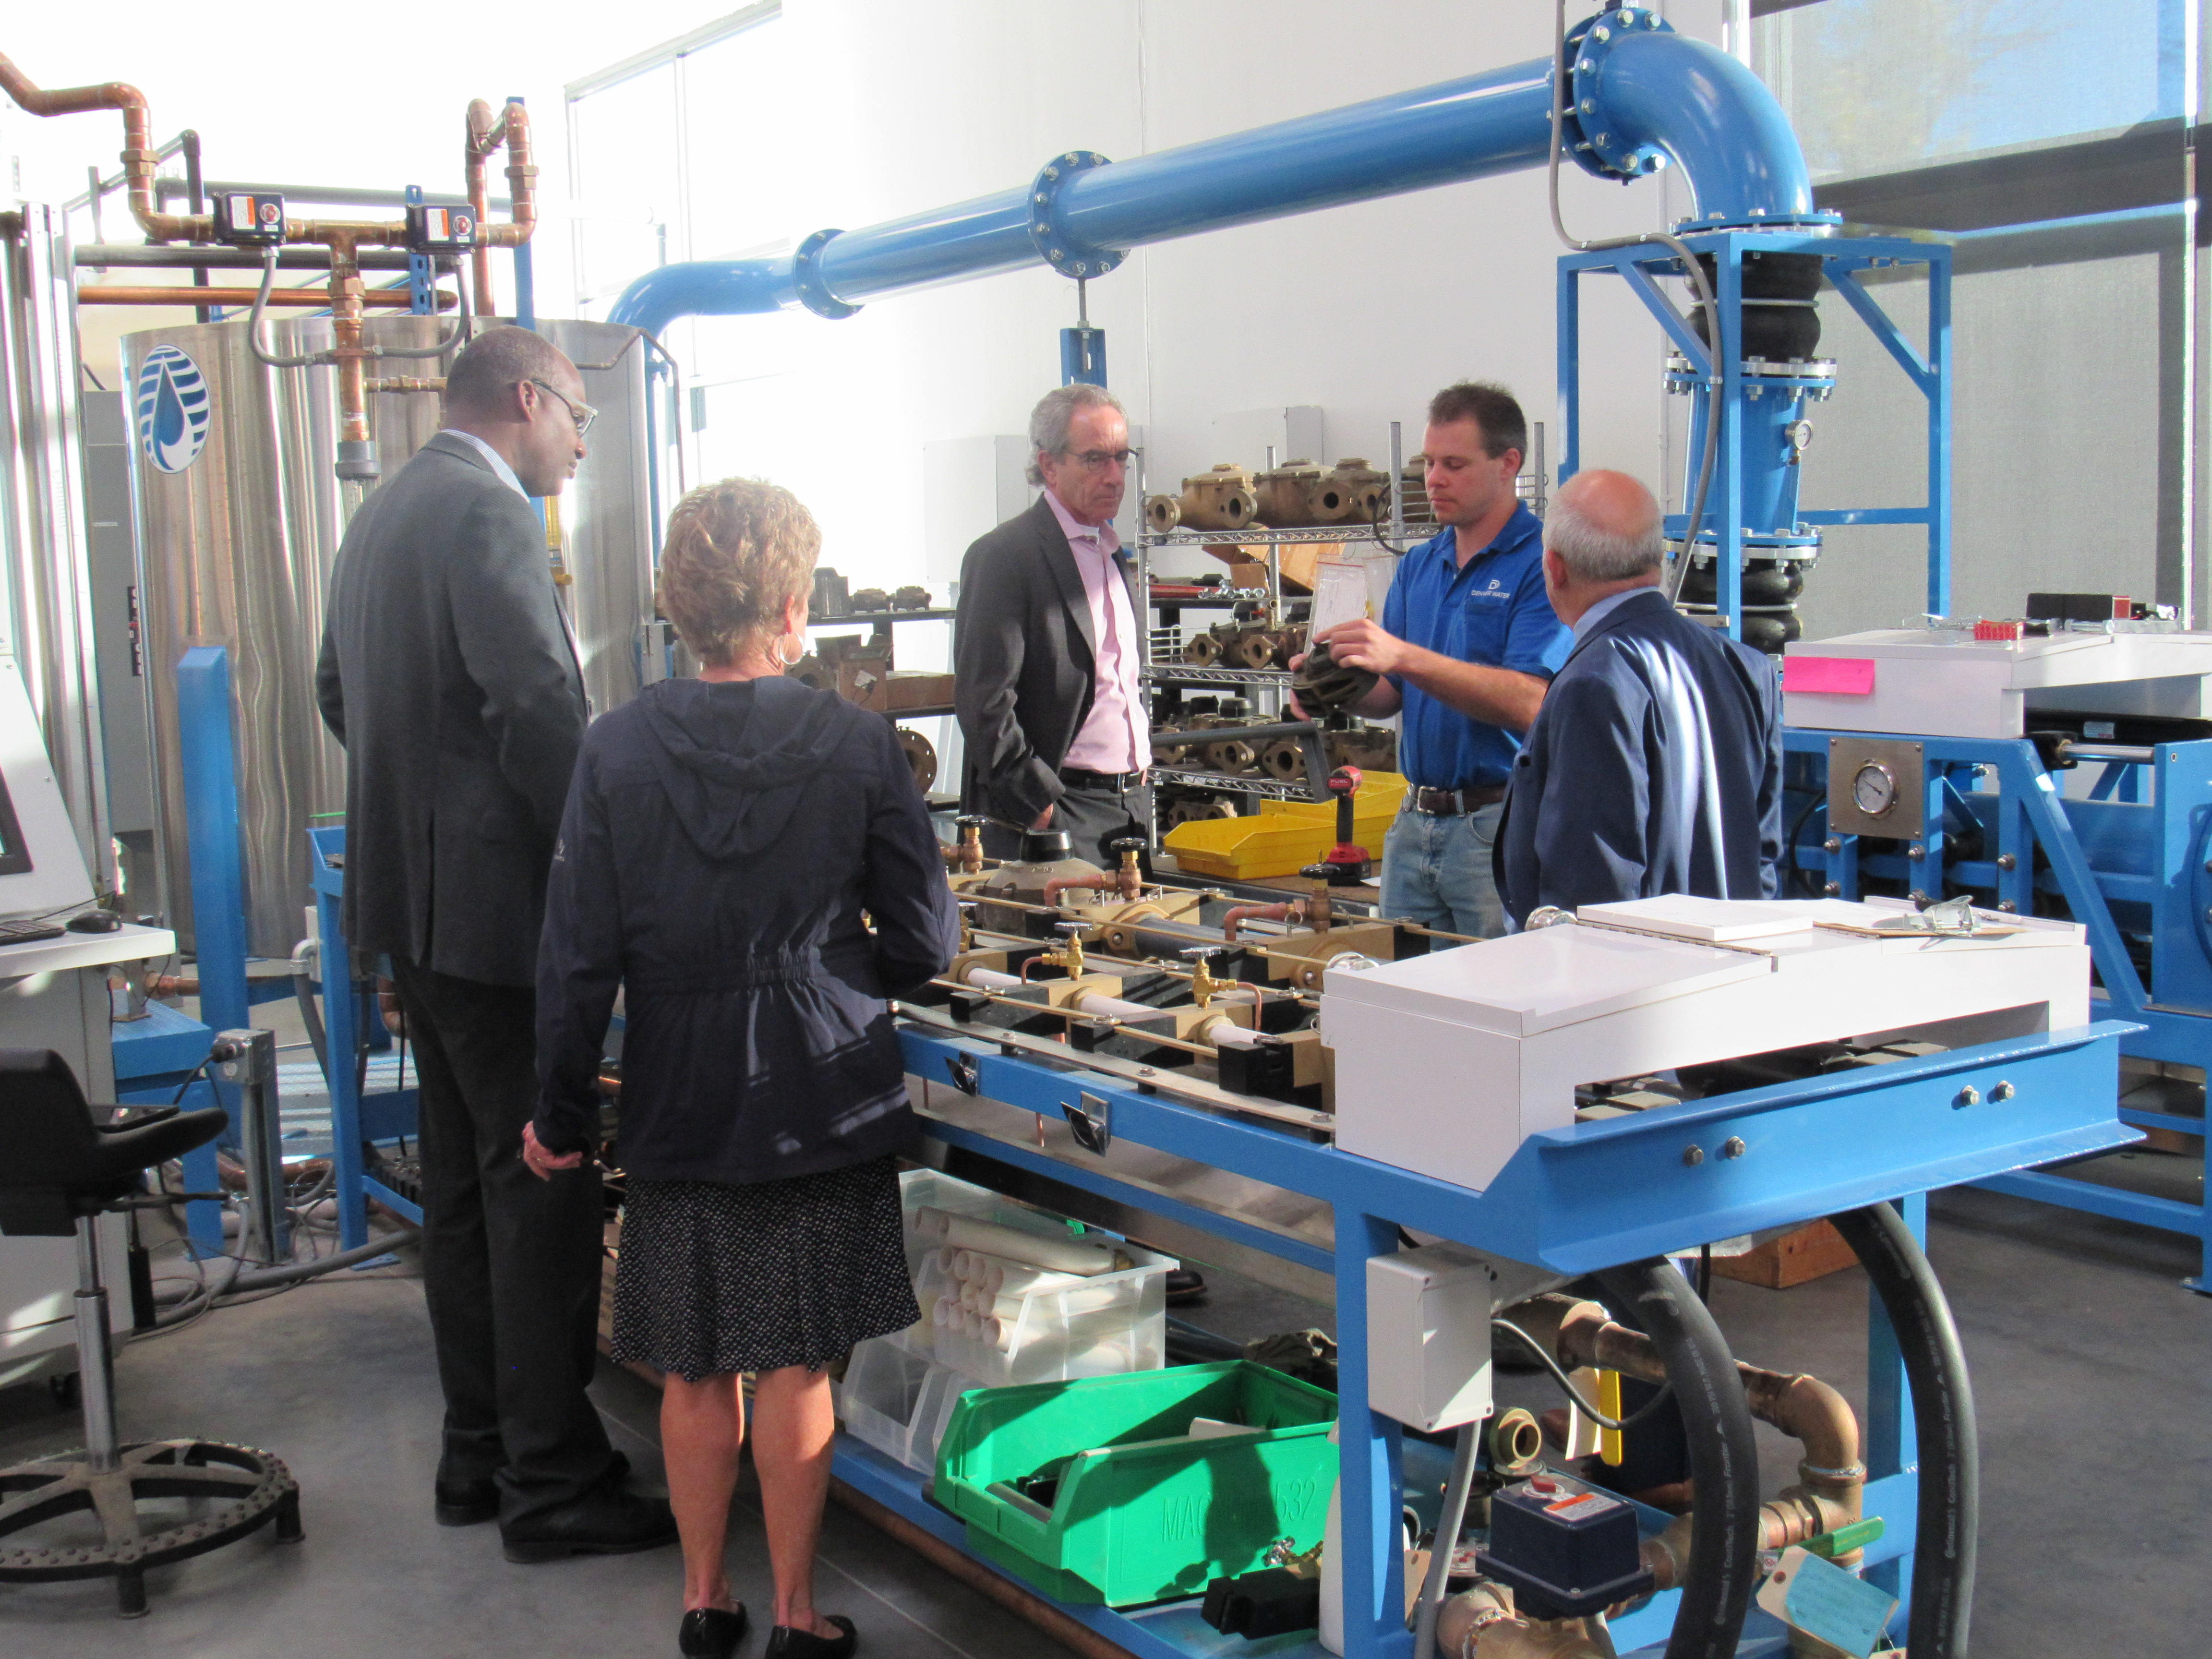 A group of people stands around a set of equipment used for testing meters.